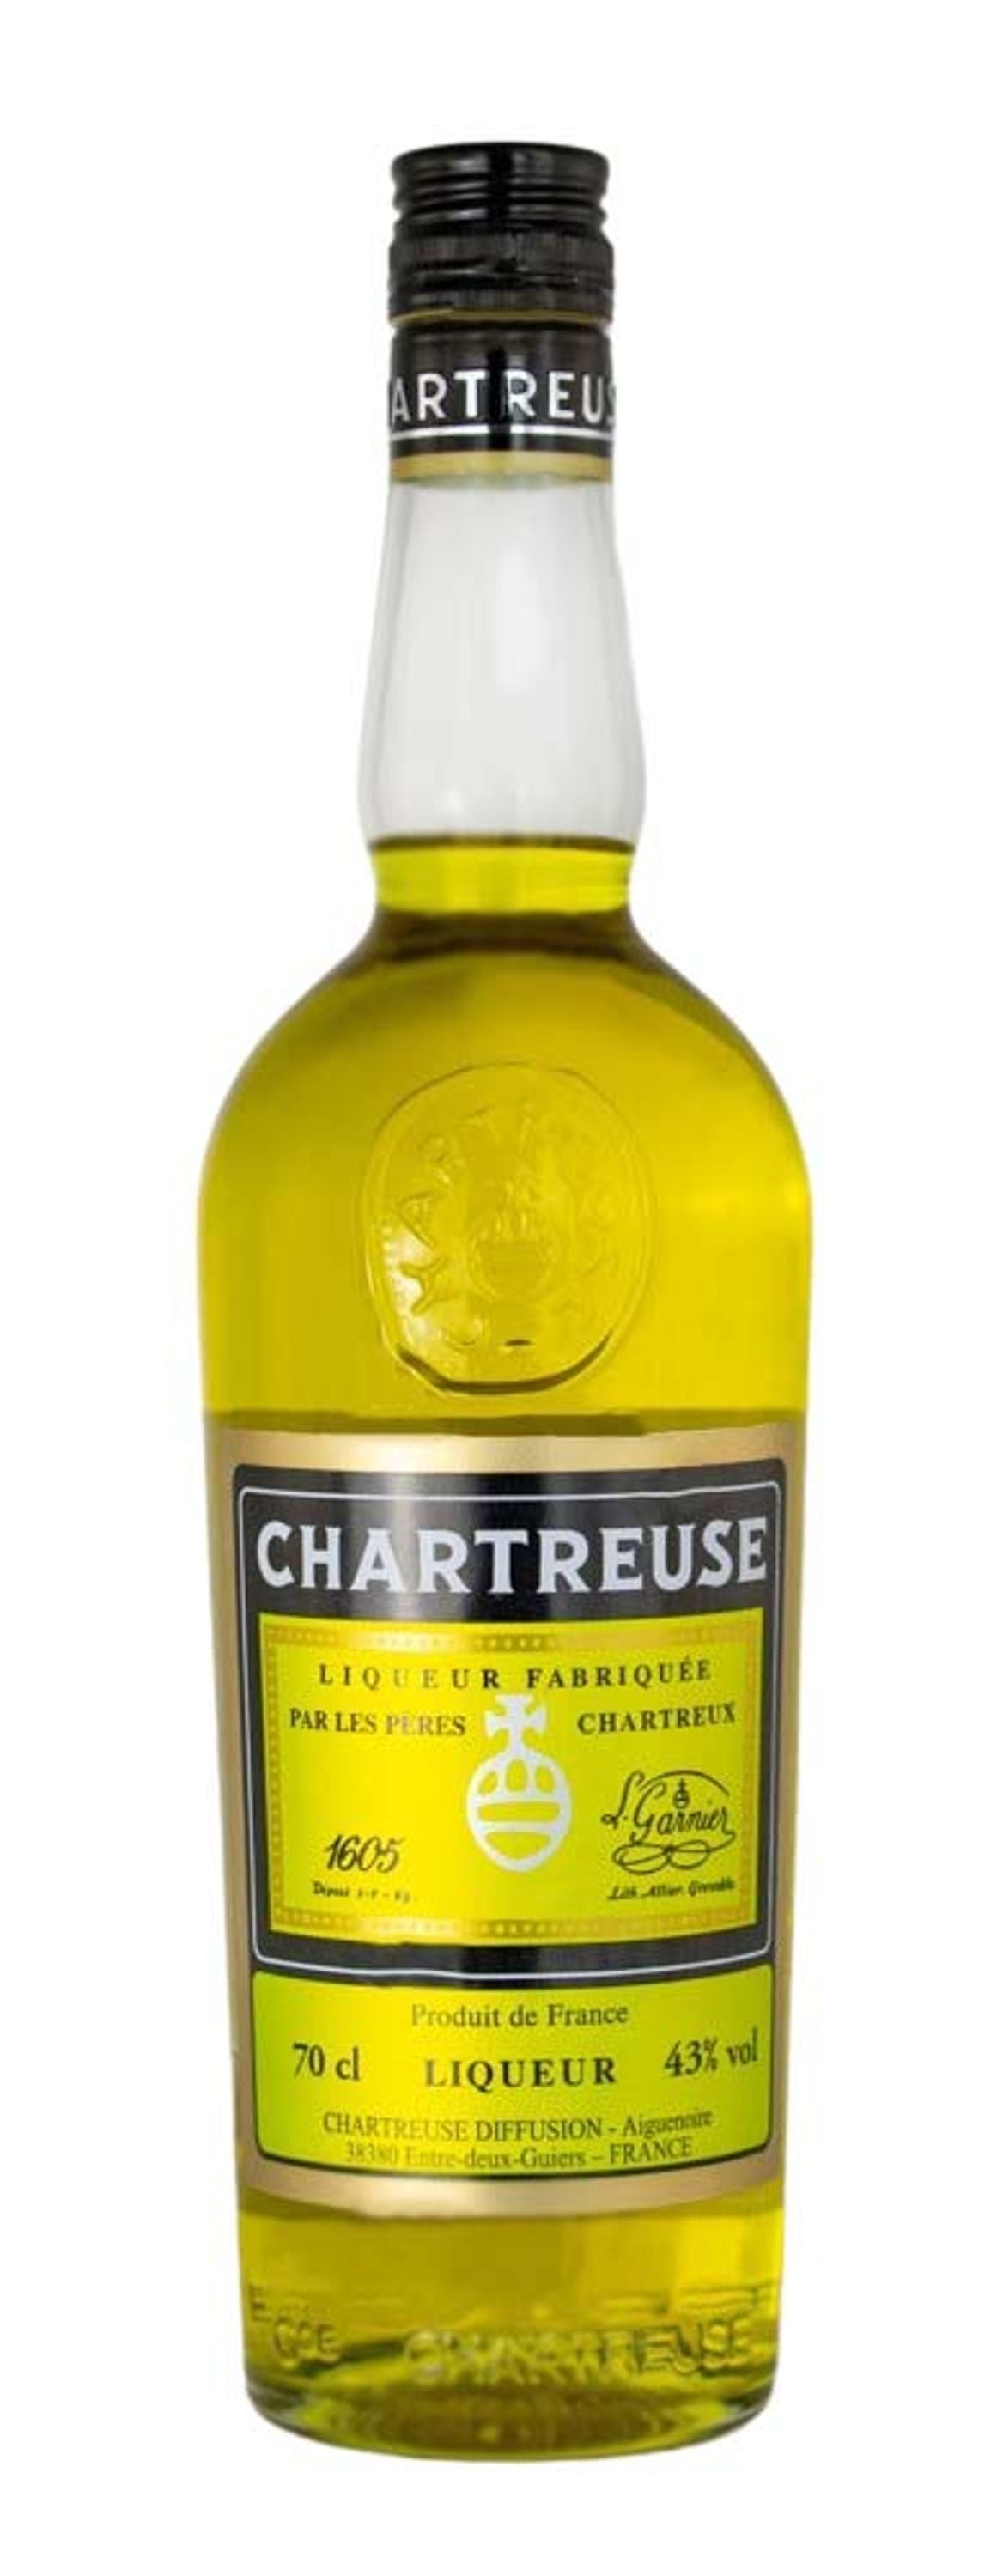 Chartreuse yellow 0.7l, alc. 43% by volume, herbal liqueur France